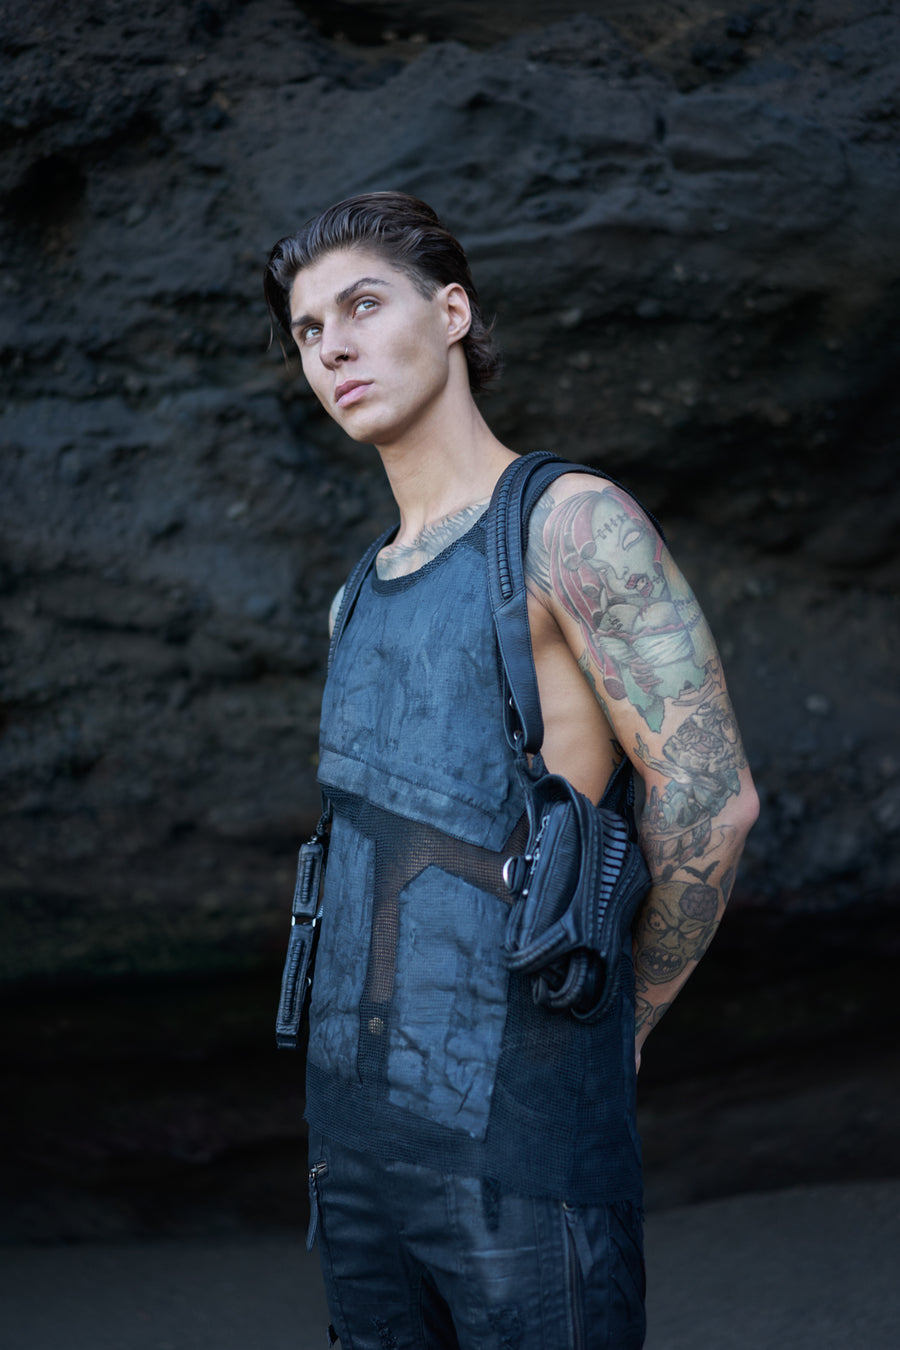 Dark post-apocalyptic apparel with leather holster bag and alternative mesh tank top